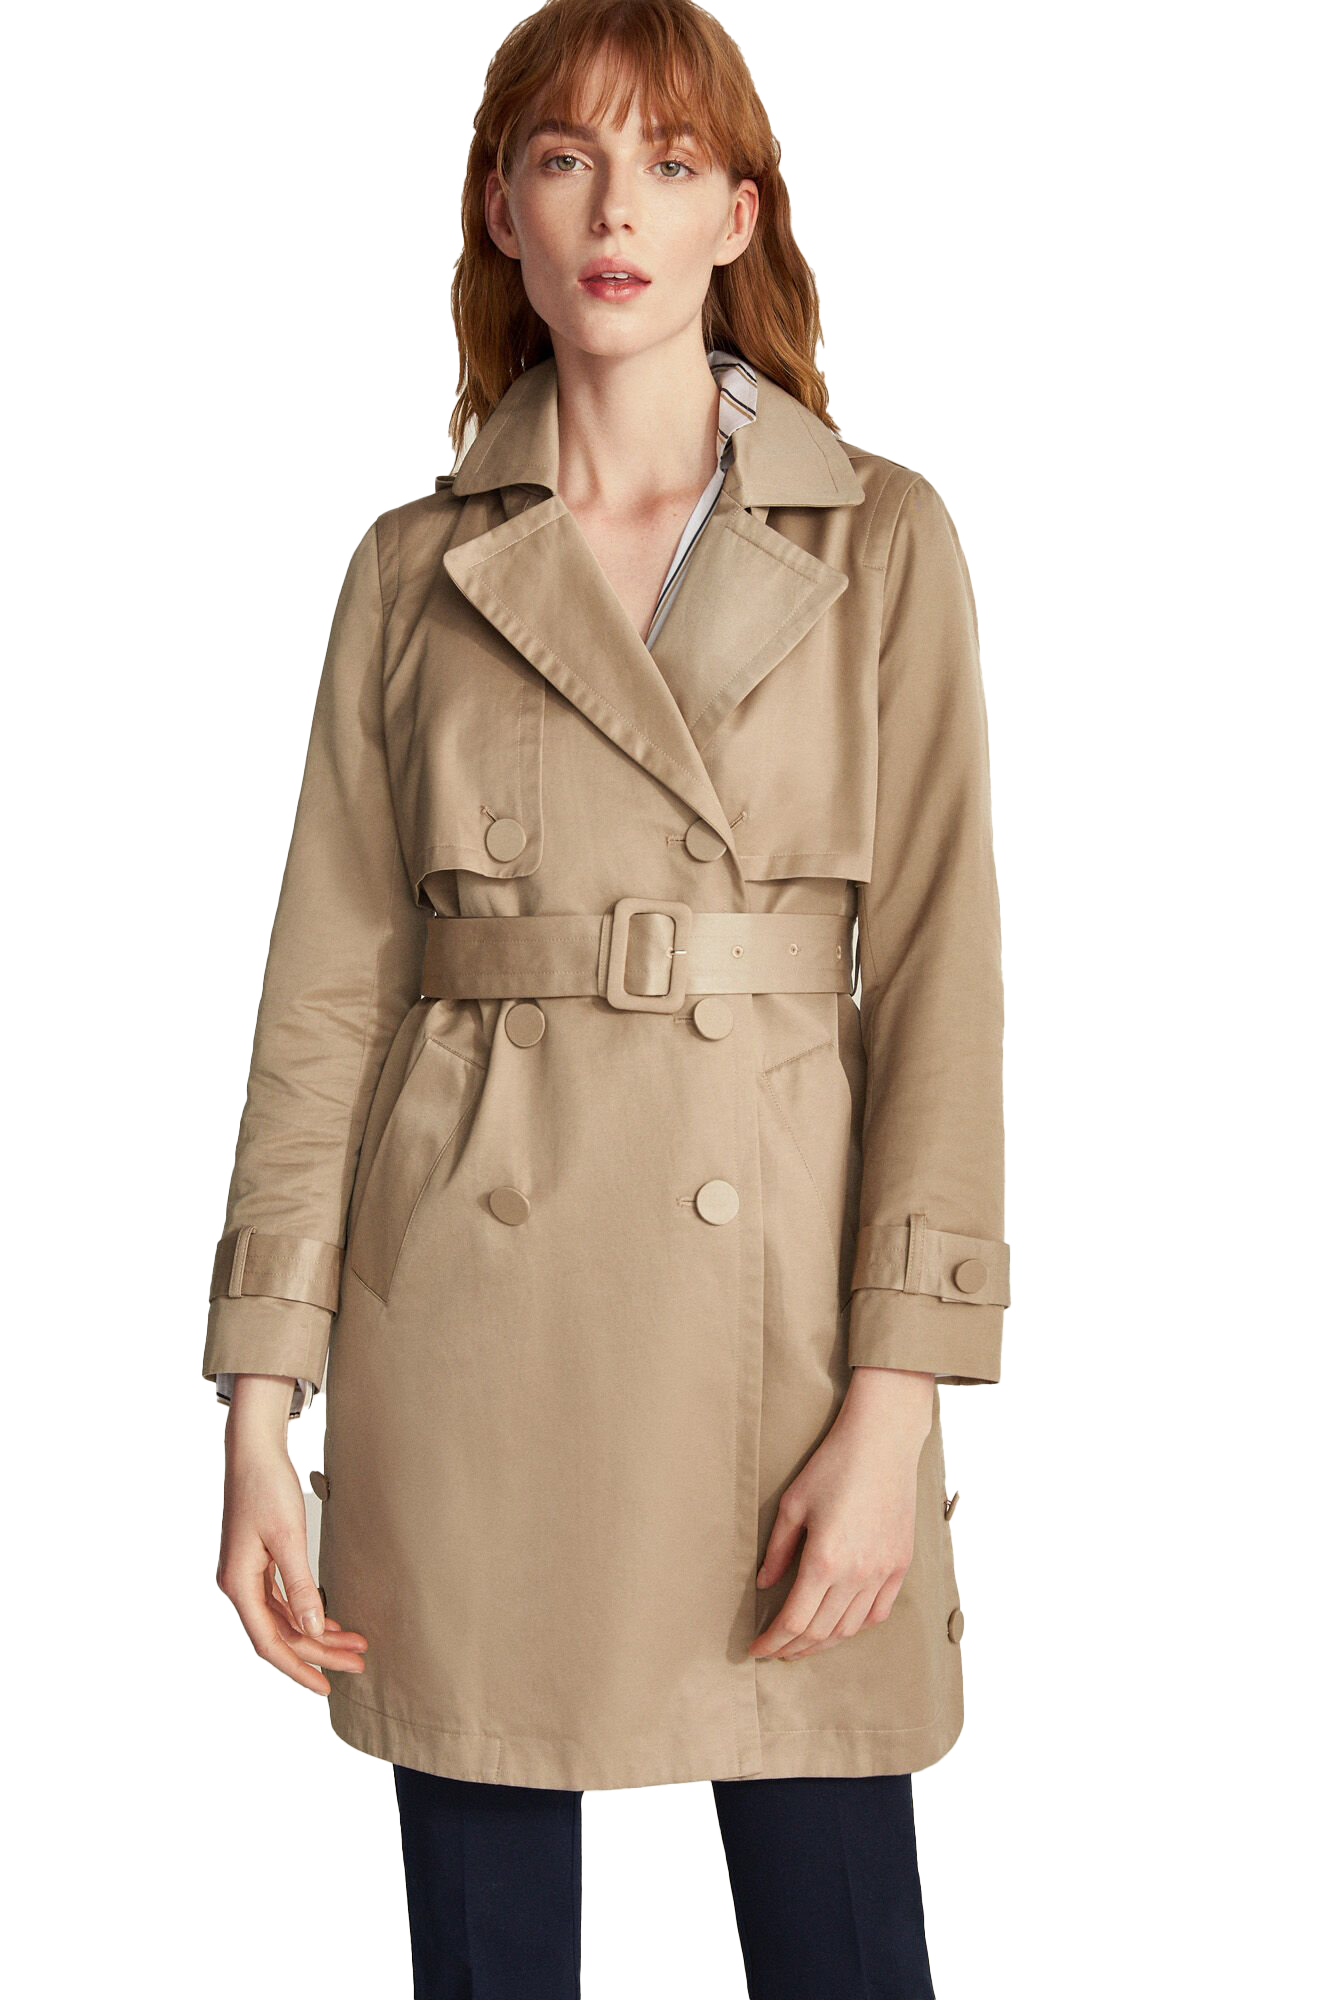 Trench Coat PNG Background Image